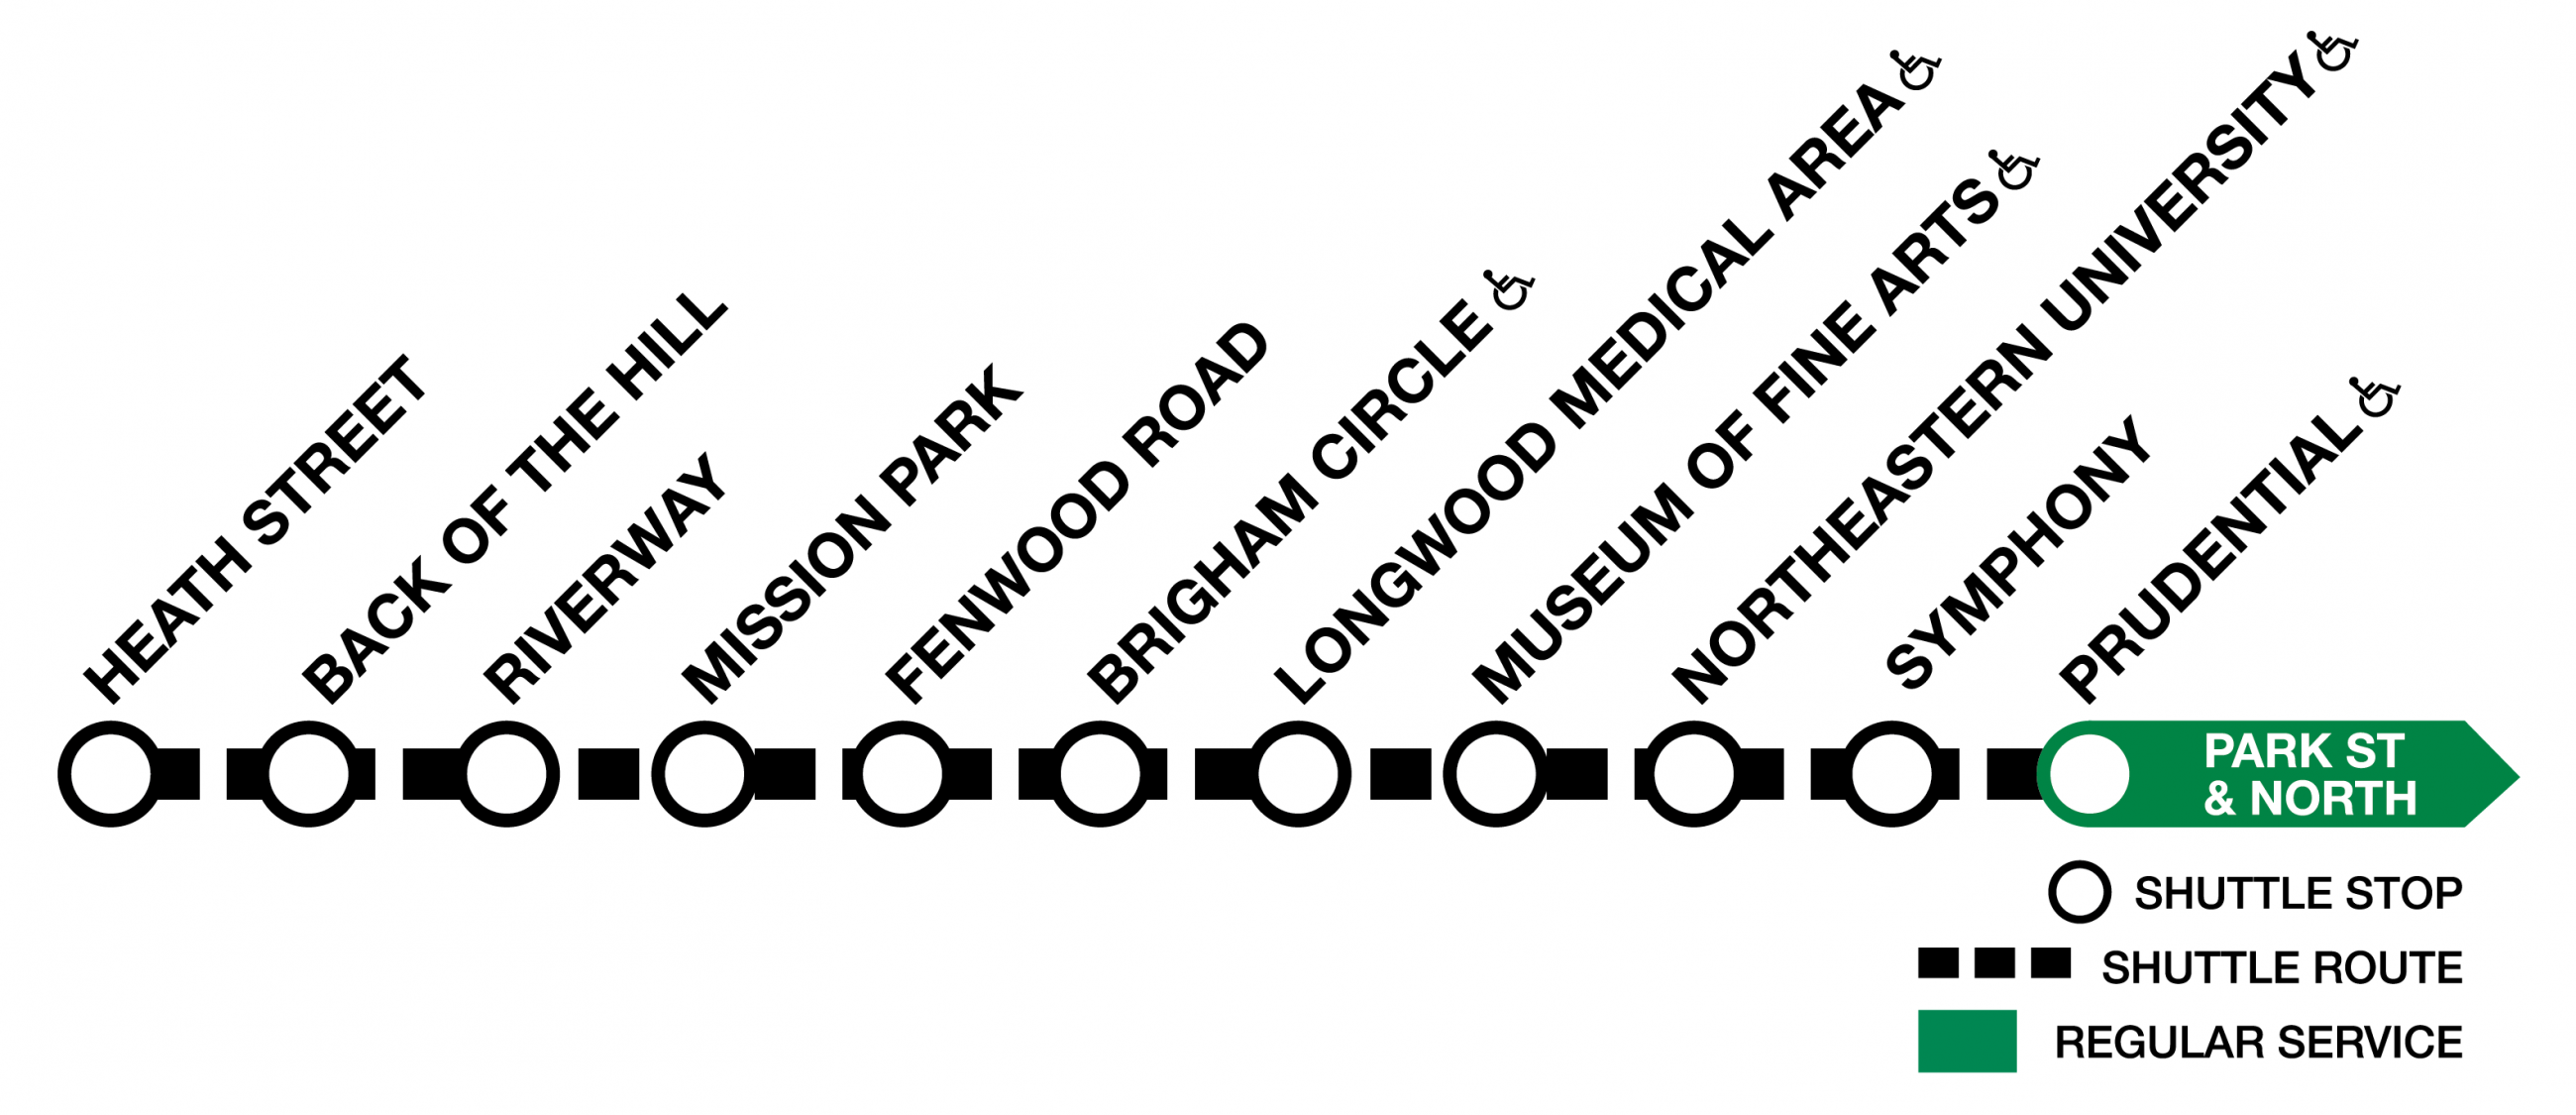 Graphic of the Green Line E, with shuttles running between Heath Street and Prudential